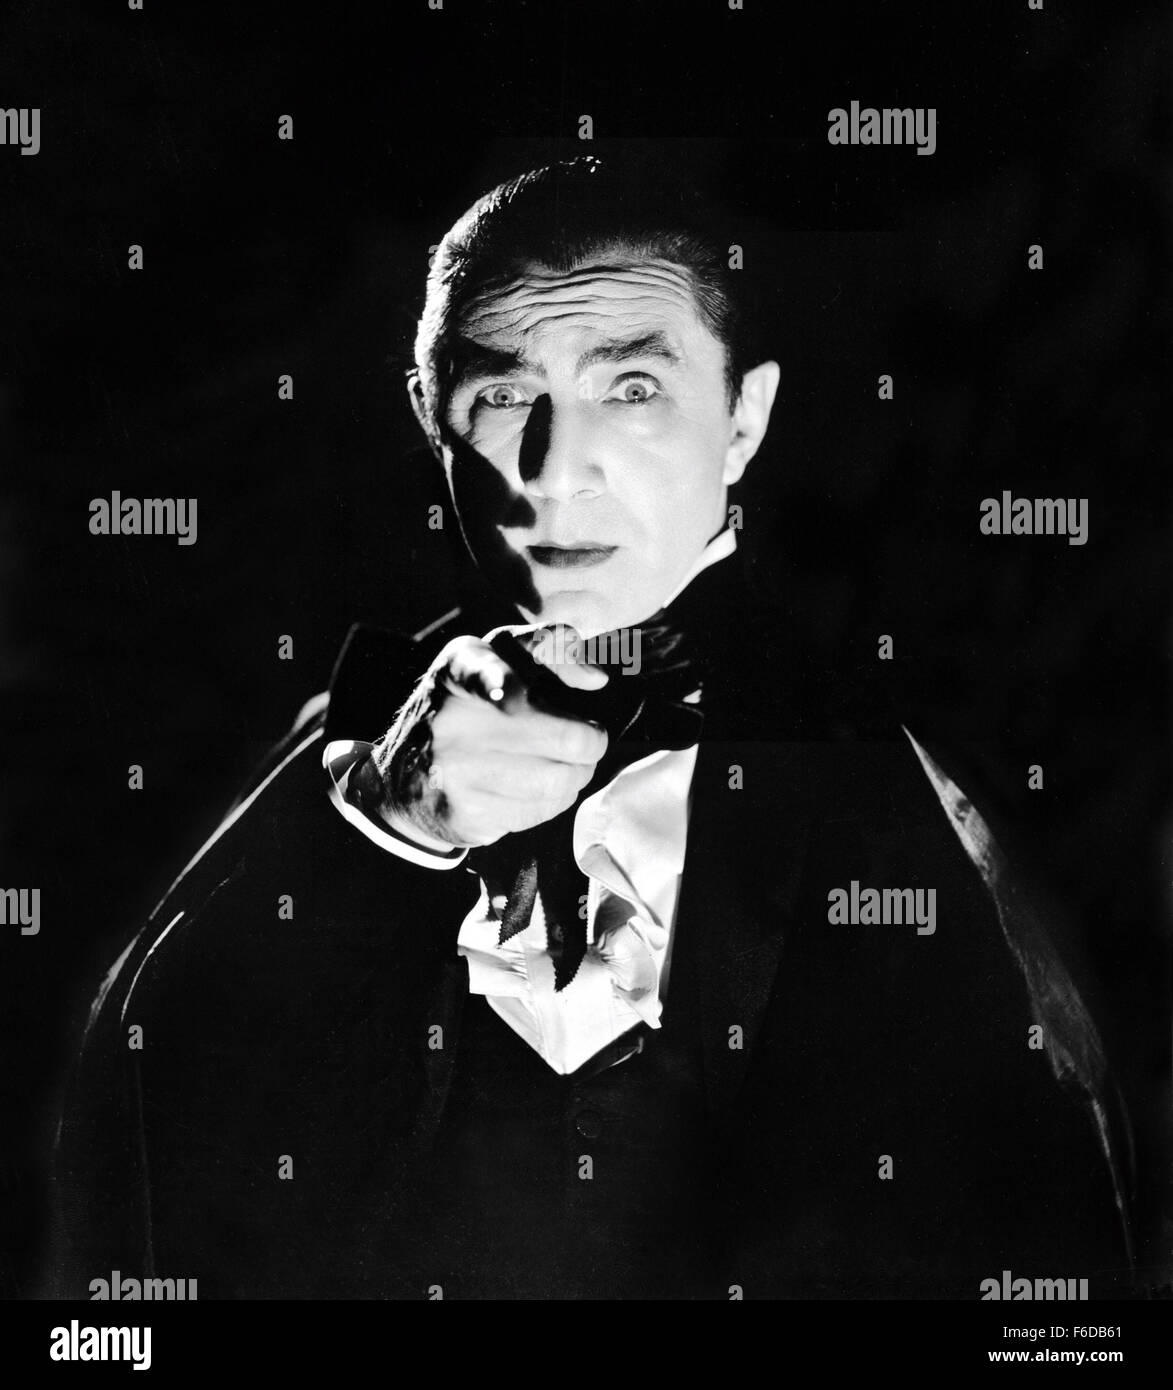 Count dracula Black and White Stock Photos & Images - Alamy